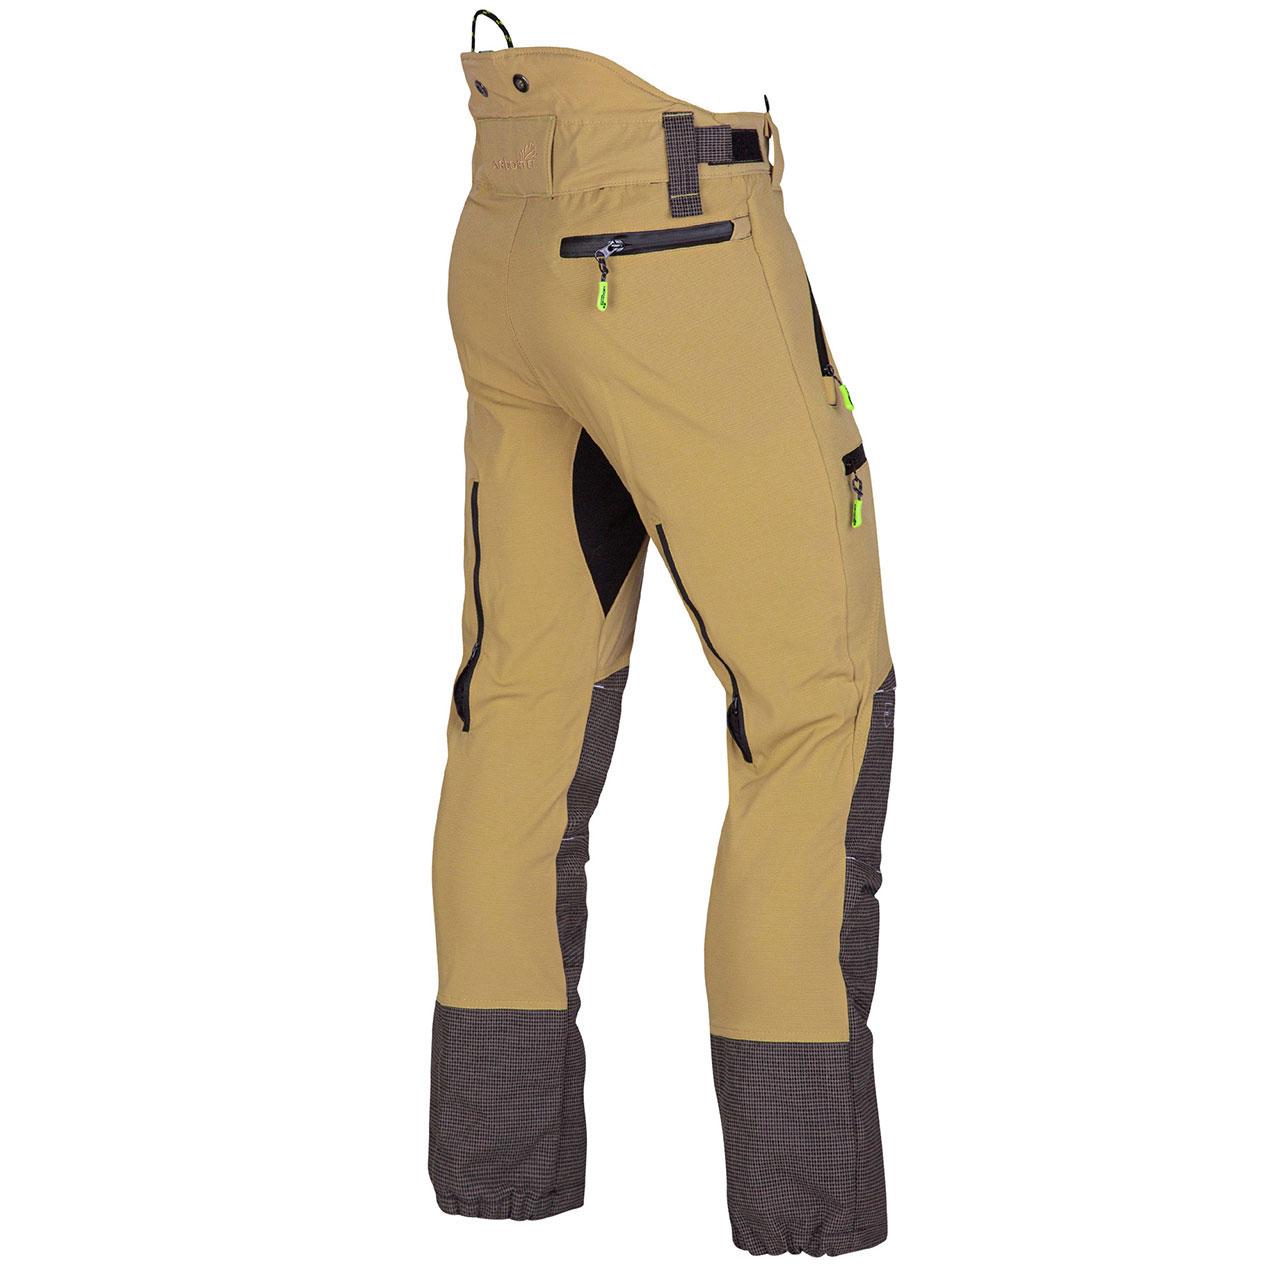 ratioparts | SIP cut protection trousers SAMOURAI, Class 1 - XS XS